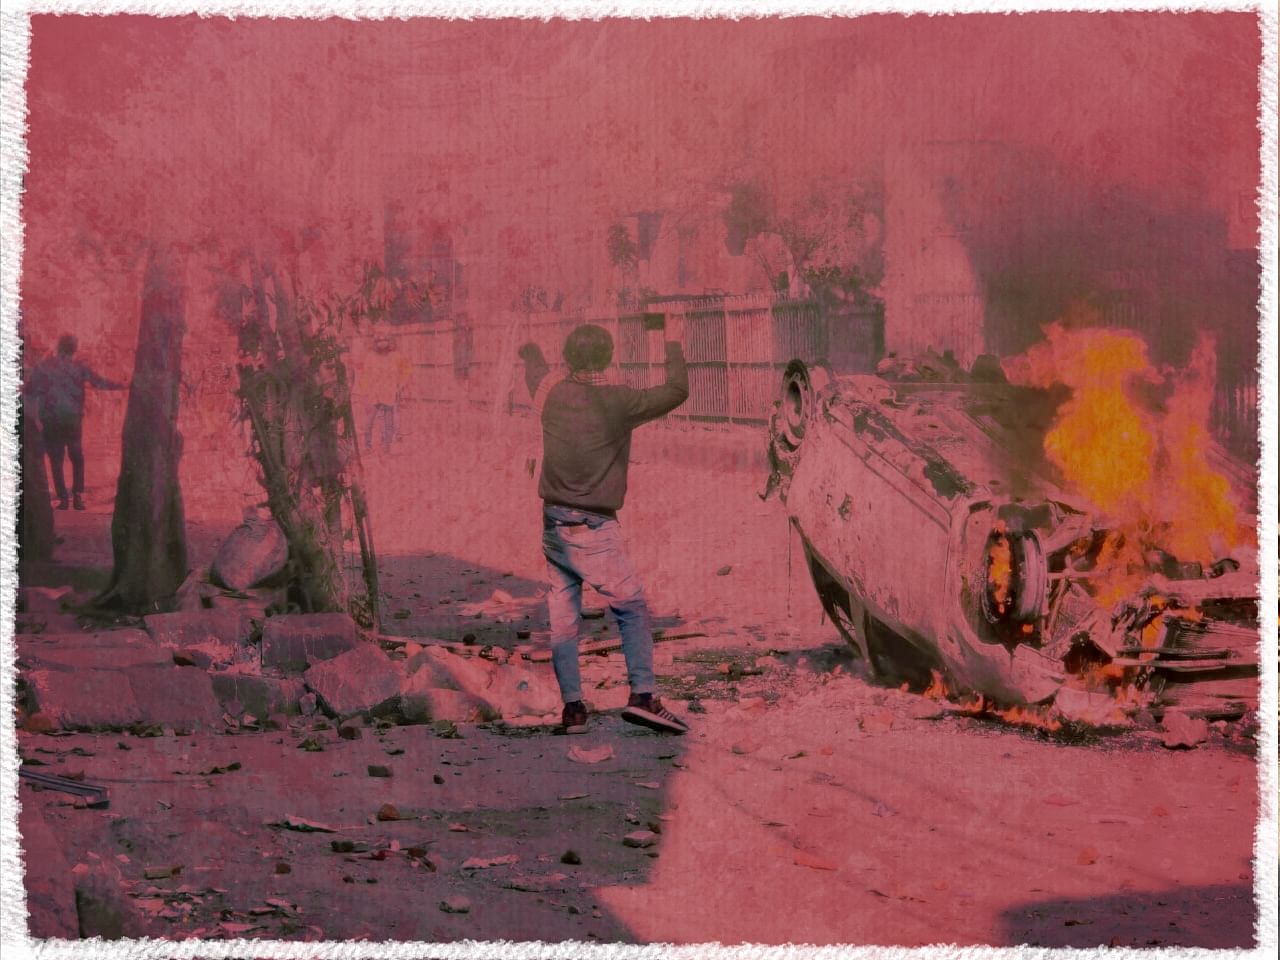 This picture was taken on 24 February in the middle of the riots that broke out between Maujpur and Jaffrabad in northeast Delhi. Of the 53 people who died, two-thirds were Muslims and the remaining Hindus.